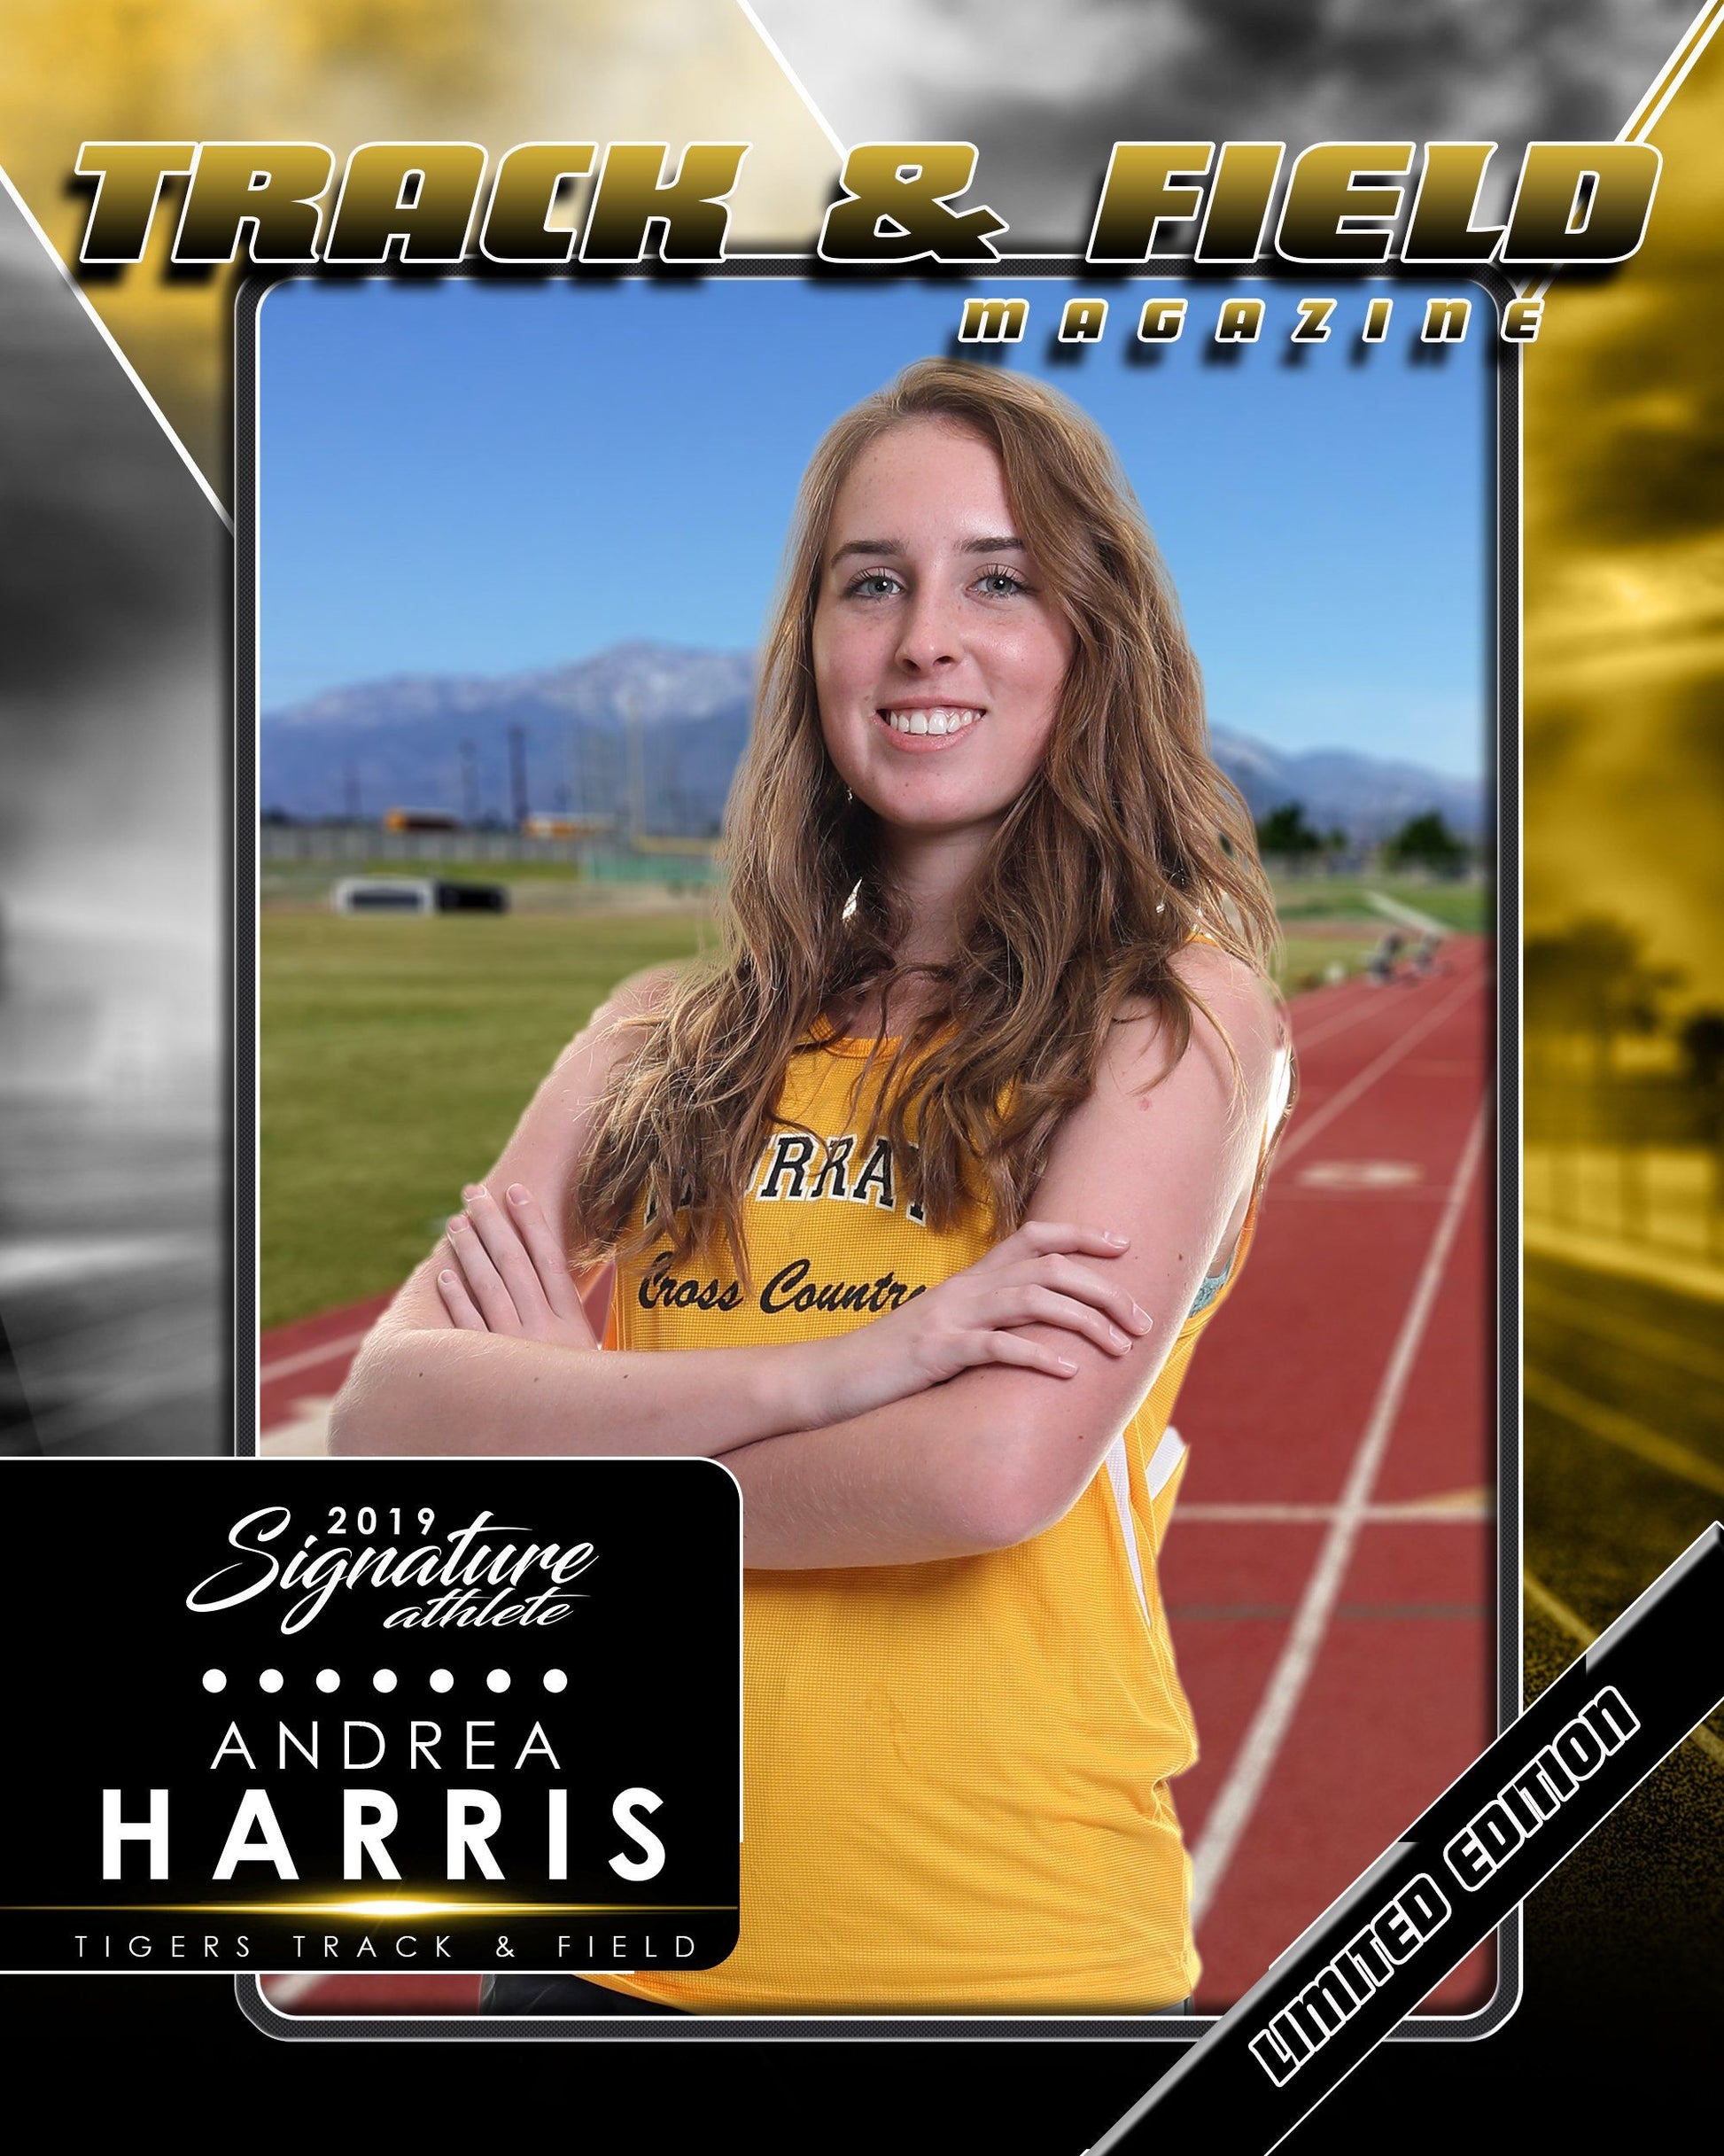 Signature Player - Track & Field - V2 - Drop-In Magazine Cover Template-Photoshop Template - Photo Solutions